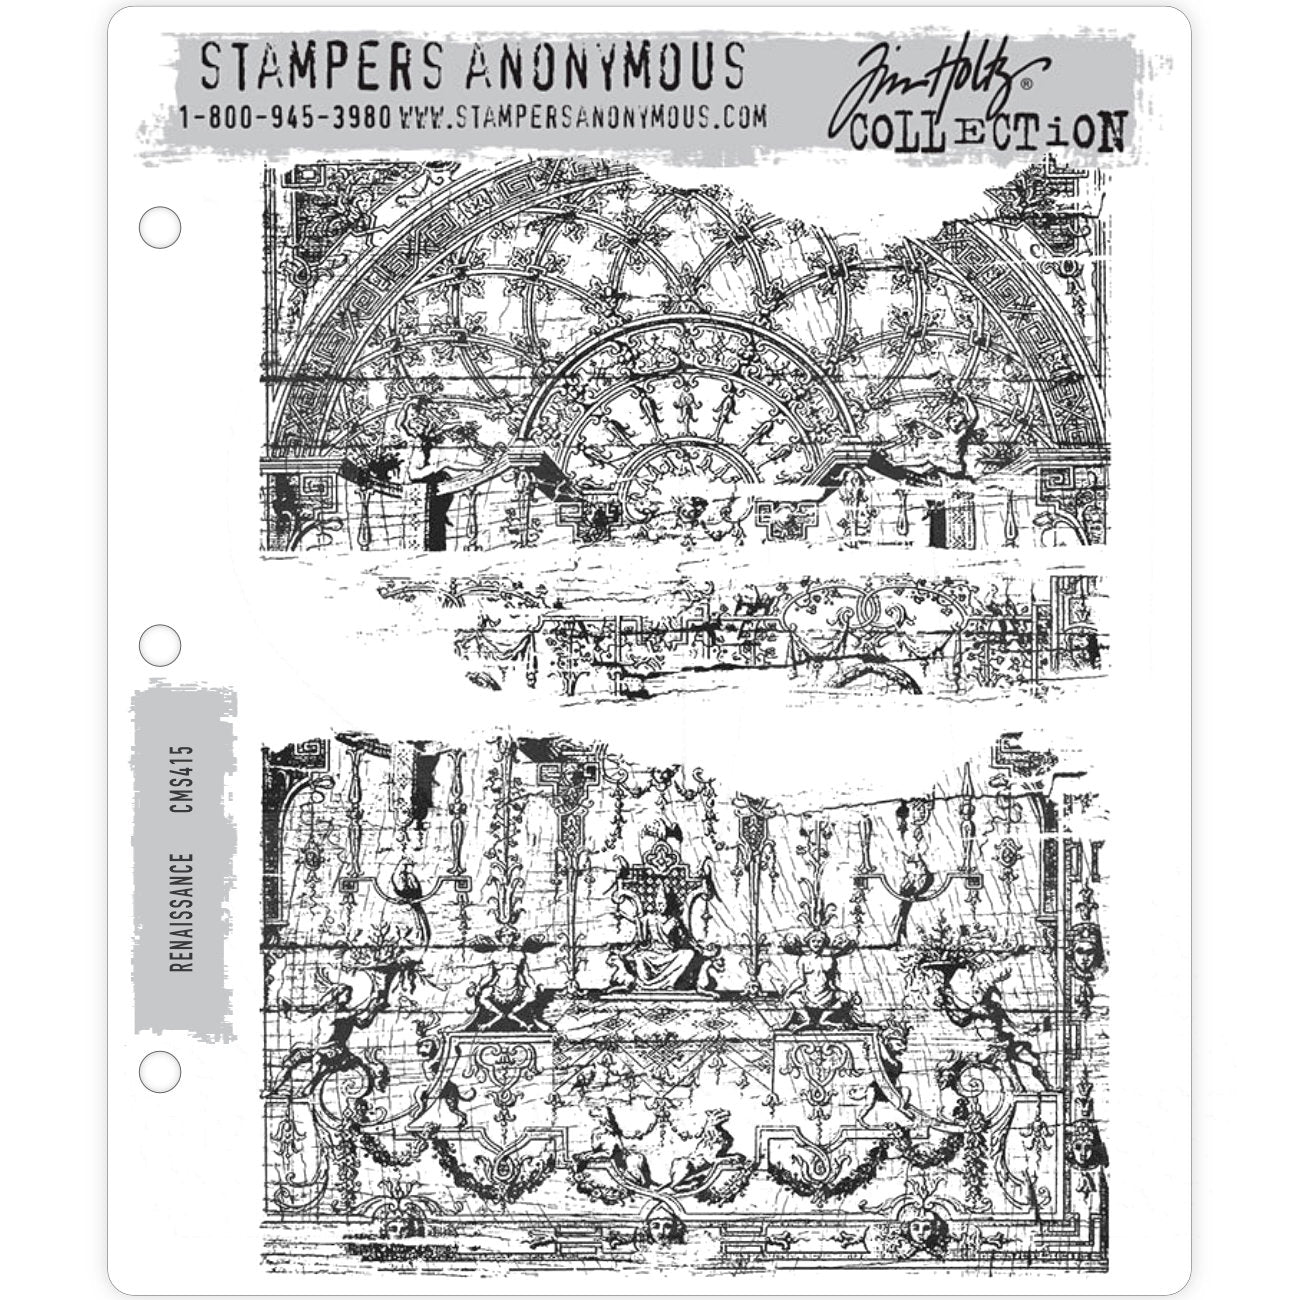 Renaissance ... 2 (two) large rubber stamps by Tim Holtz (CMS415).   The designs in this set include 2 beautiful backgrounds, perfect all year round! A stunning pair of stamps that work well as a featured area or layered under other elements.  Sizes : each stamp measures approx 3 1/4" x 5 1/4".